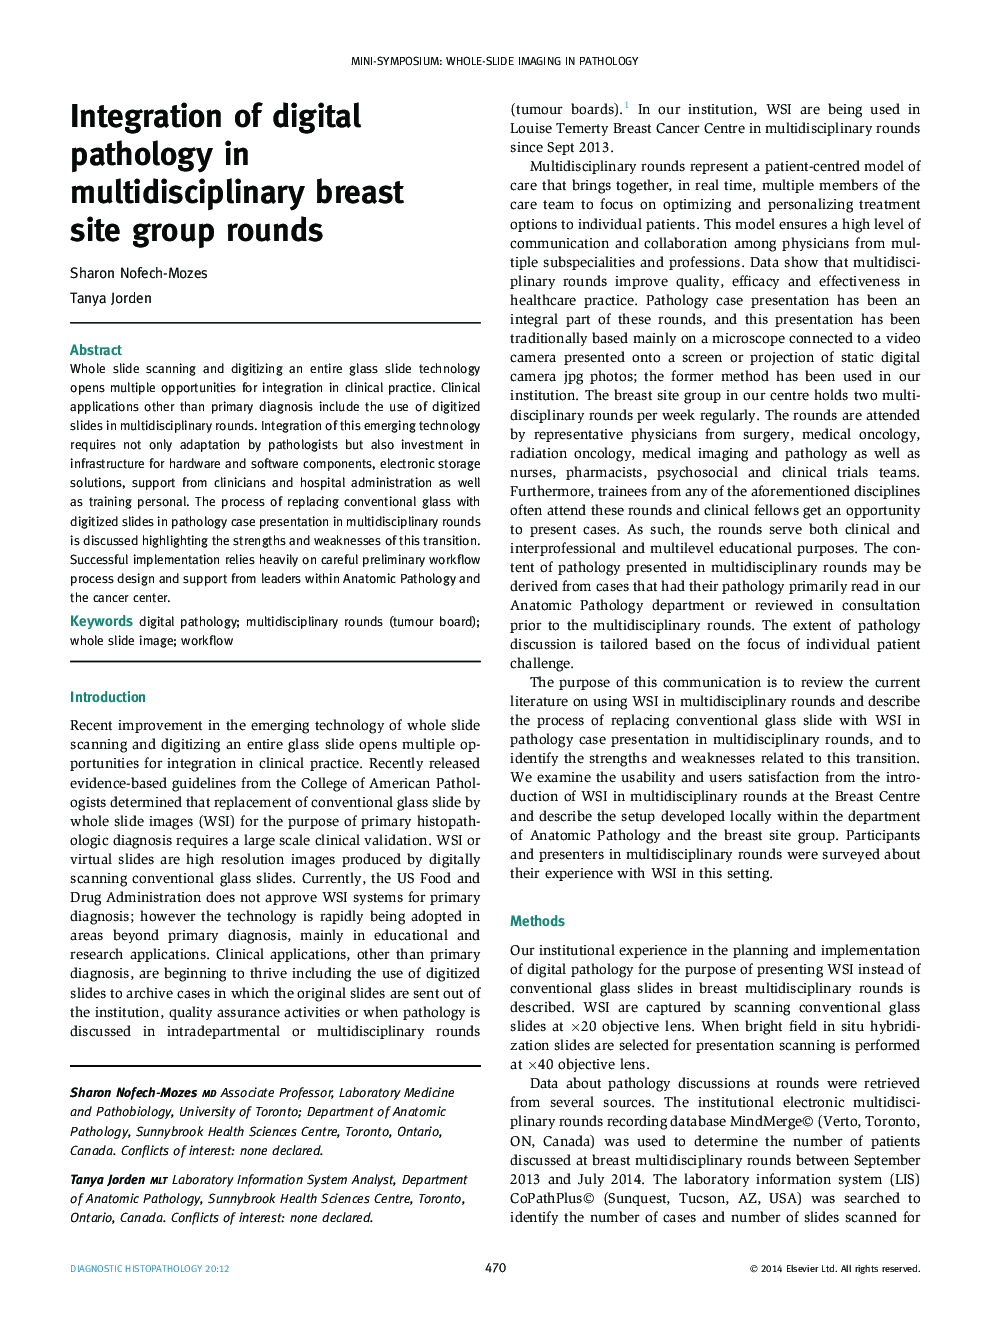 Integration of digital pathology in multidisciplinary breast site group rounds